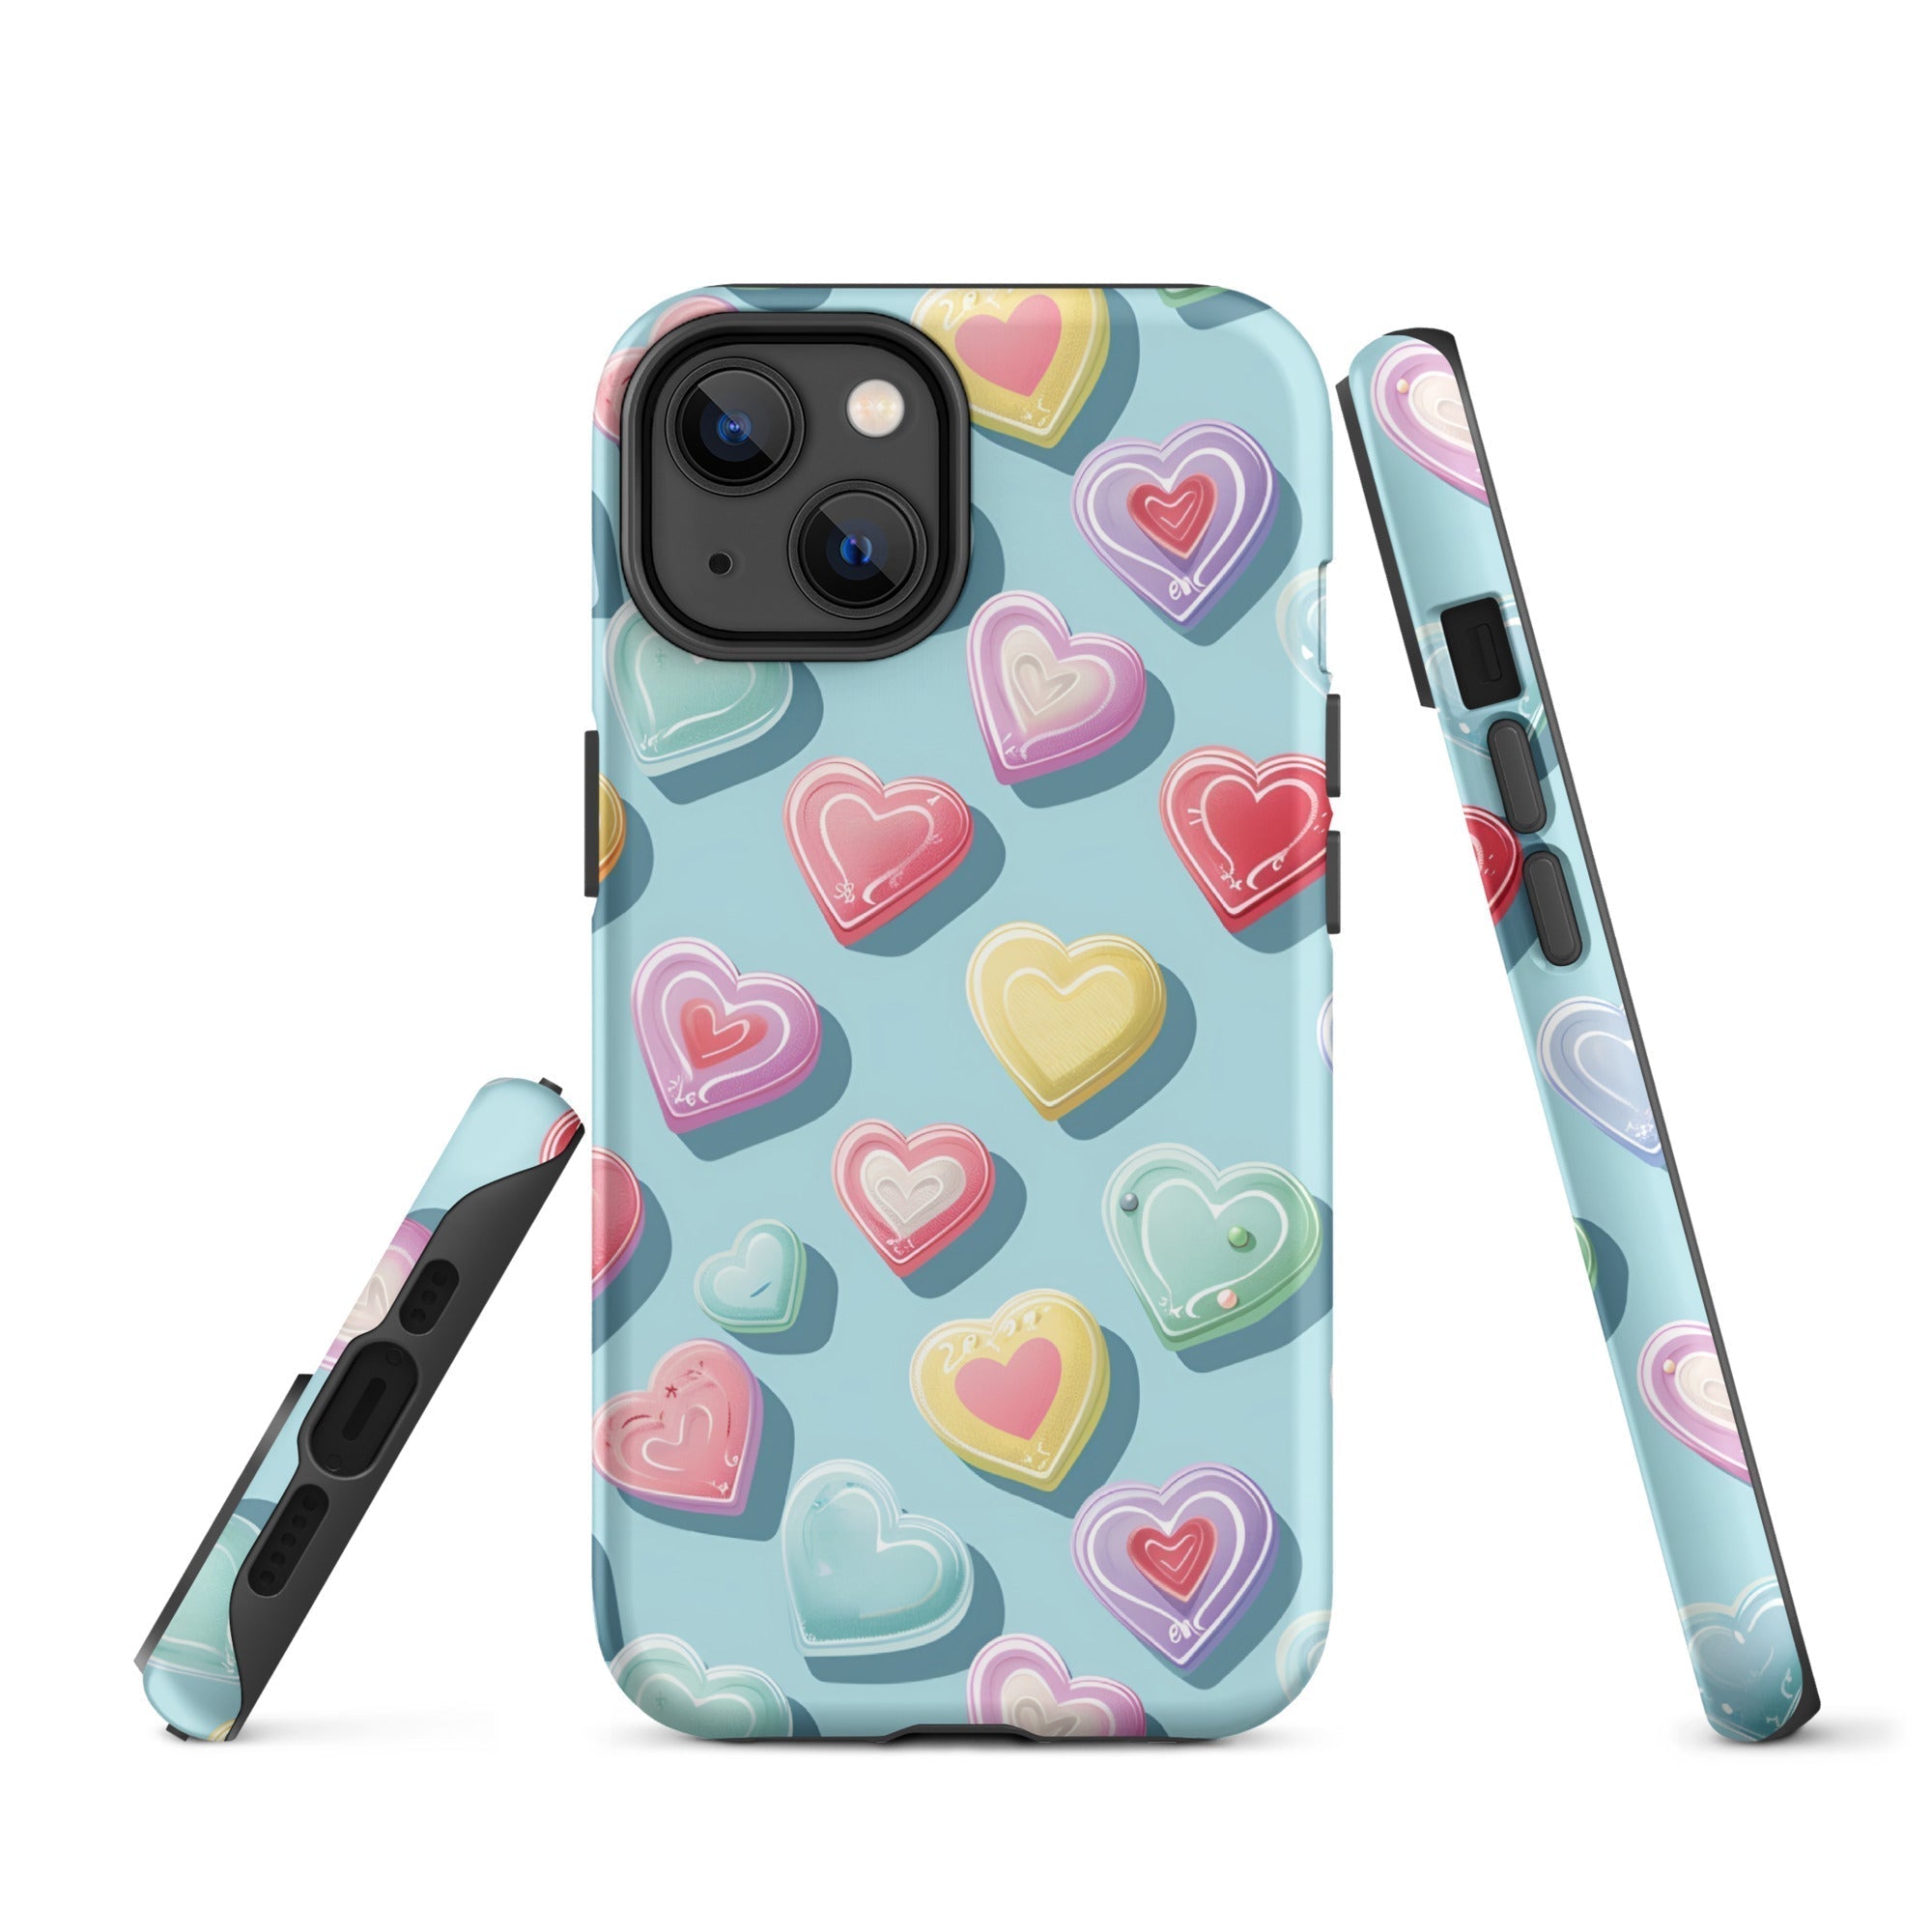 Candy Hearts: Cupid's Canvas - iPhone Case - Pattern Symphony